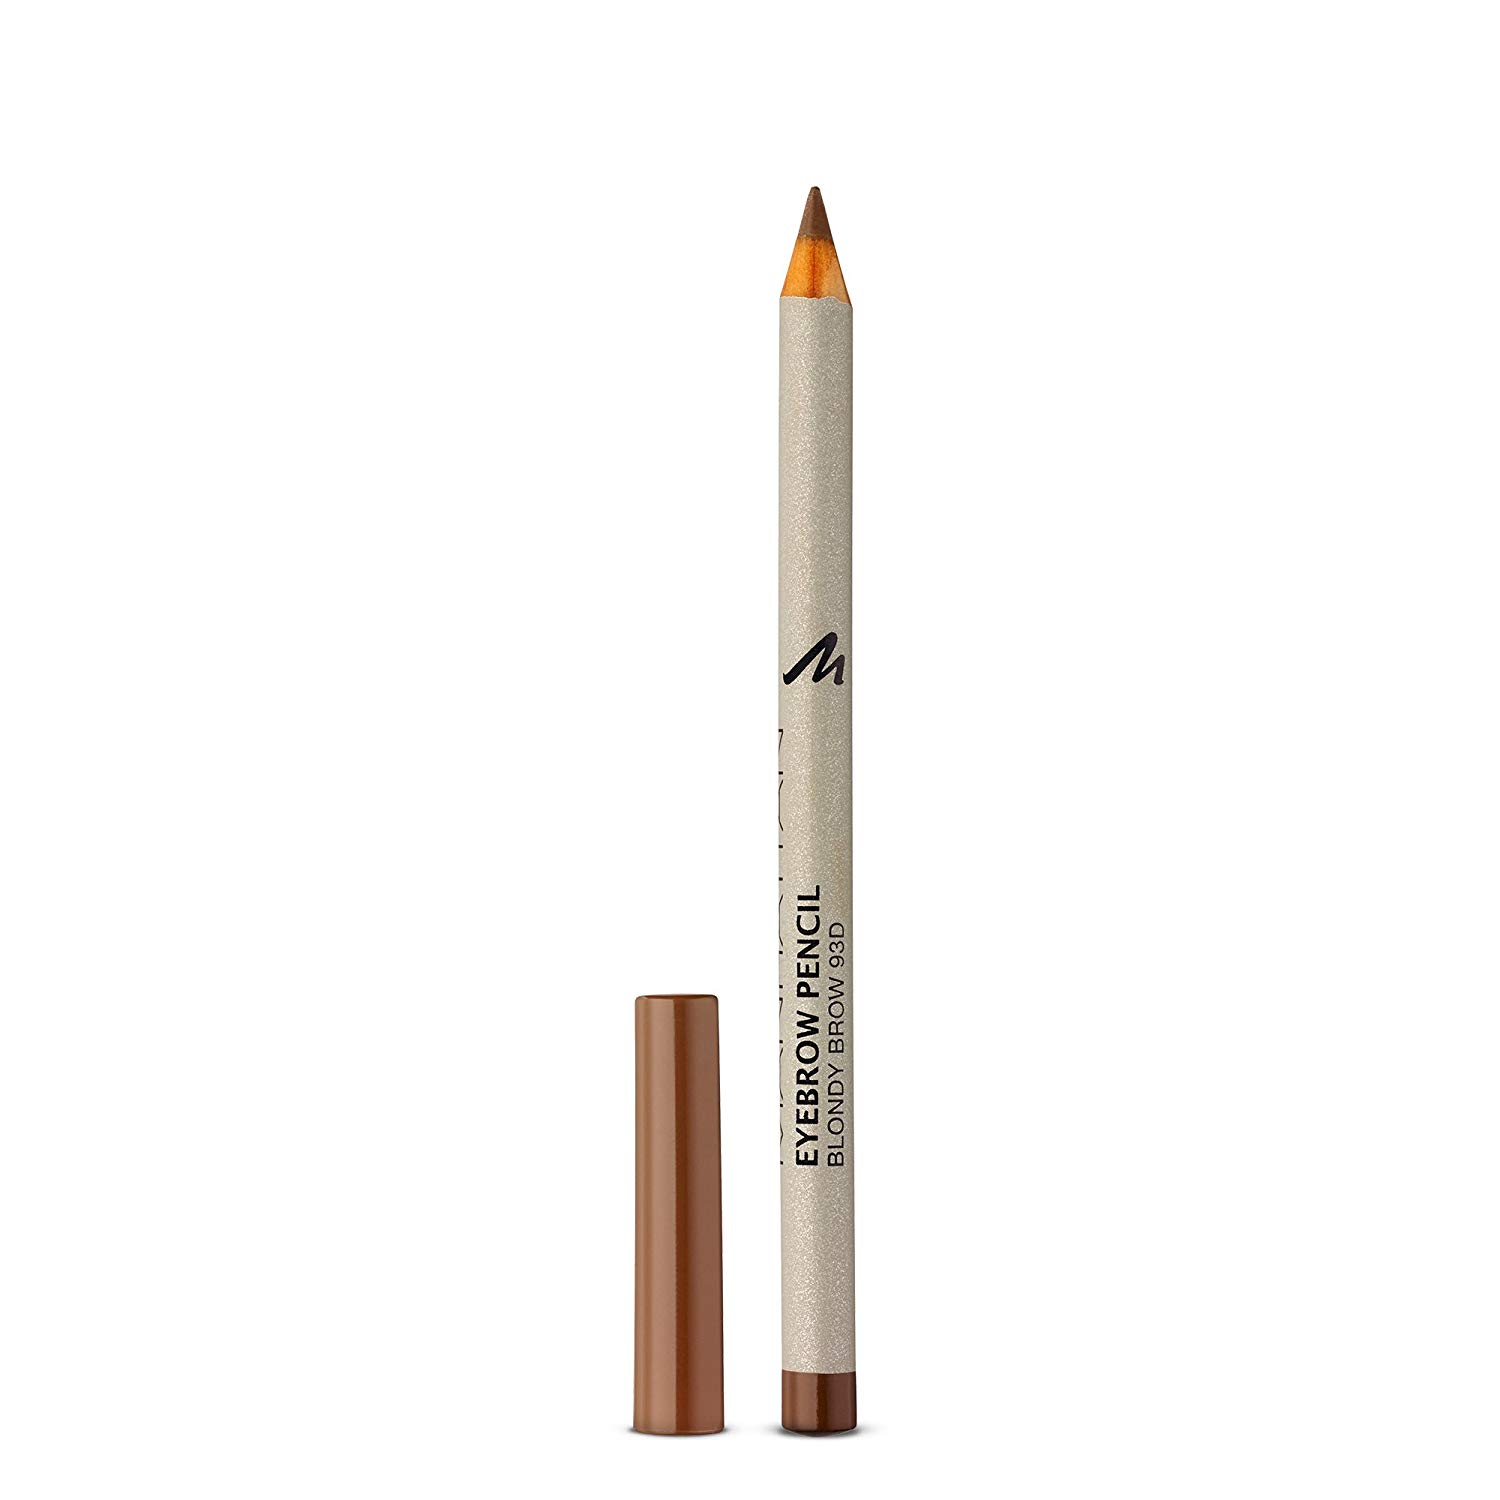 Manhattan Eyebrow Pencil - Light brown eyebrow pencil for emphasized and precisely defined eyebrows - Brow-Nie 99W - 1 x 1.3 g, 93d brow ‎blondy